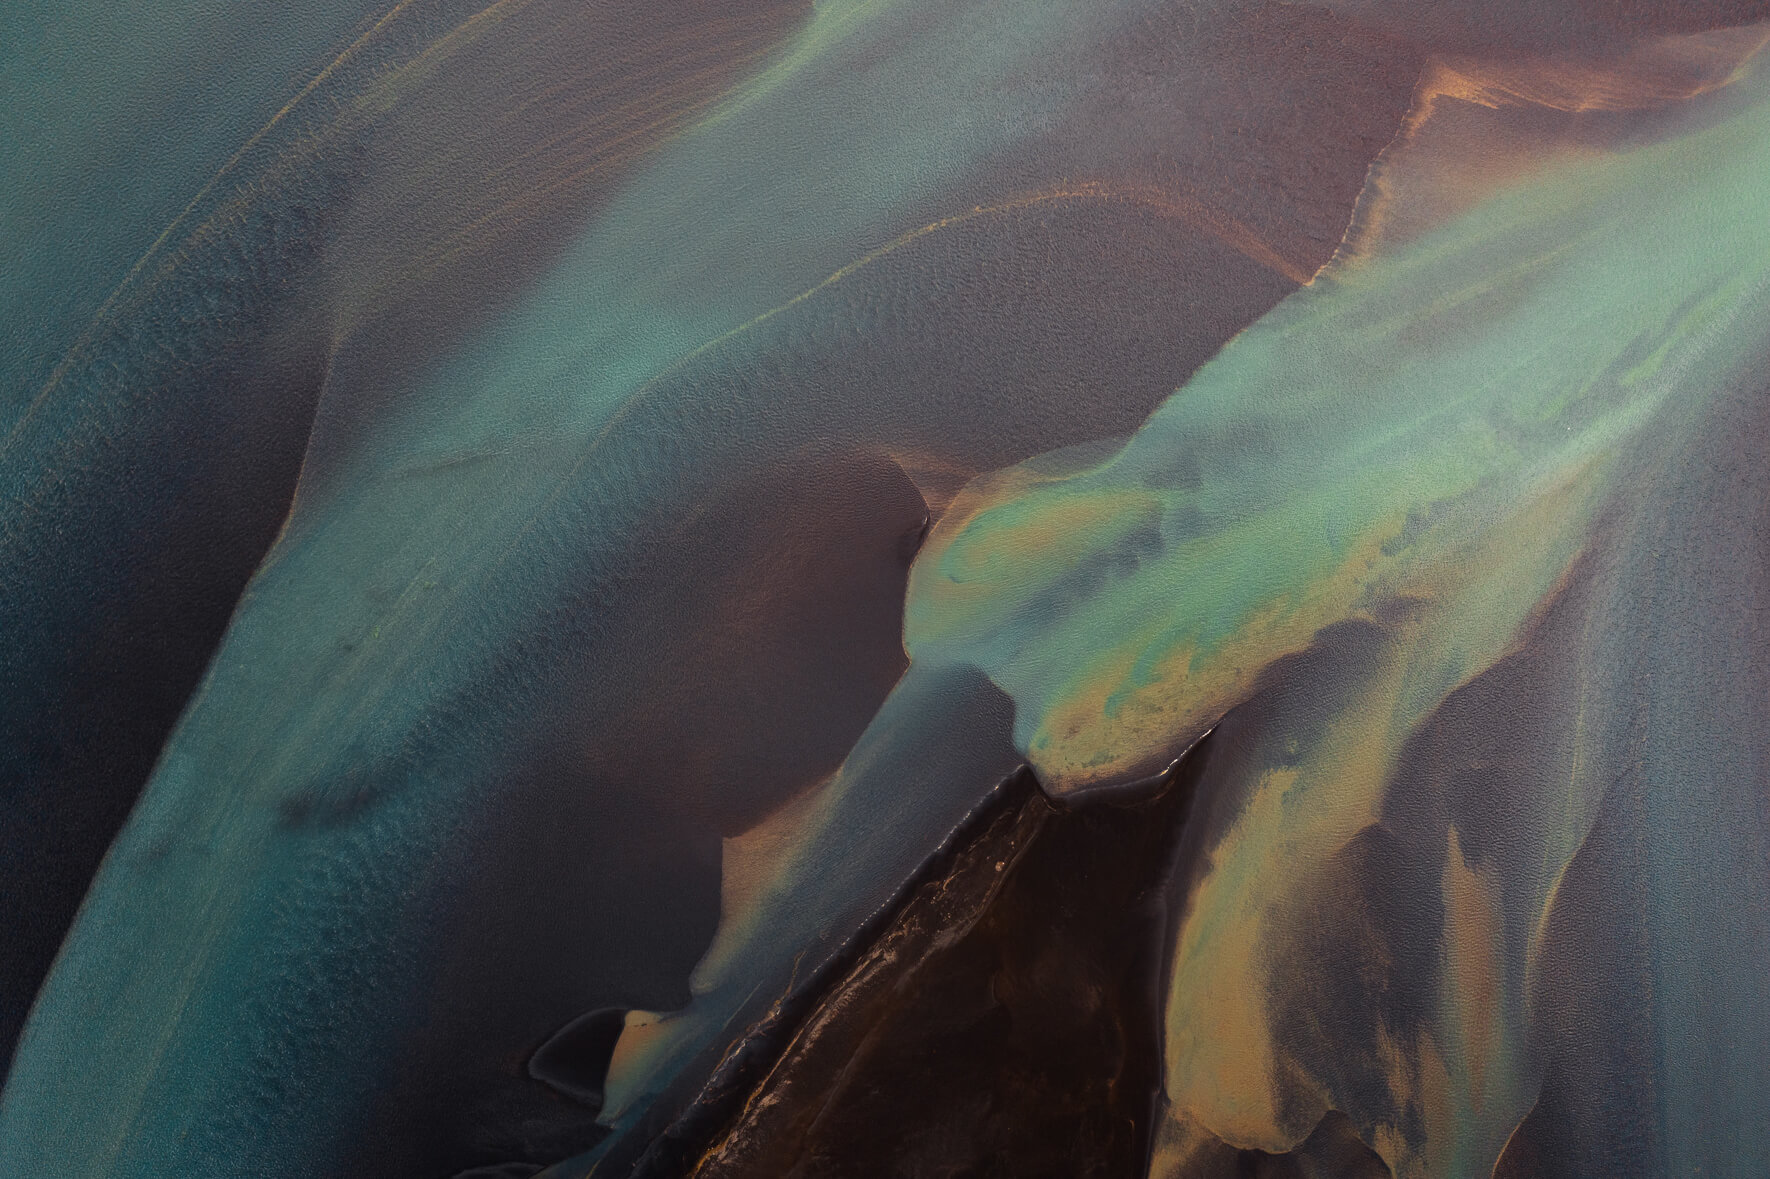 Colorful aerial view of a glacial river in Iceland with sandbanks